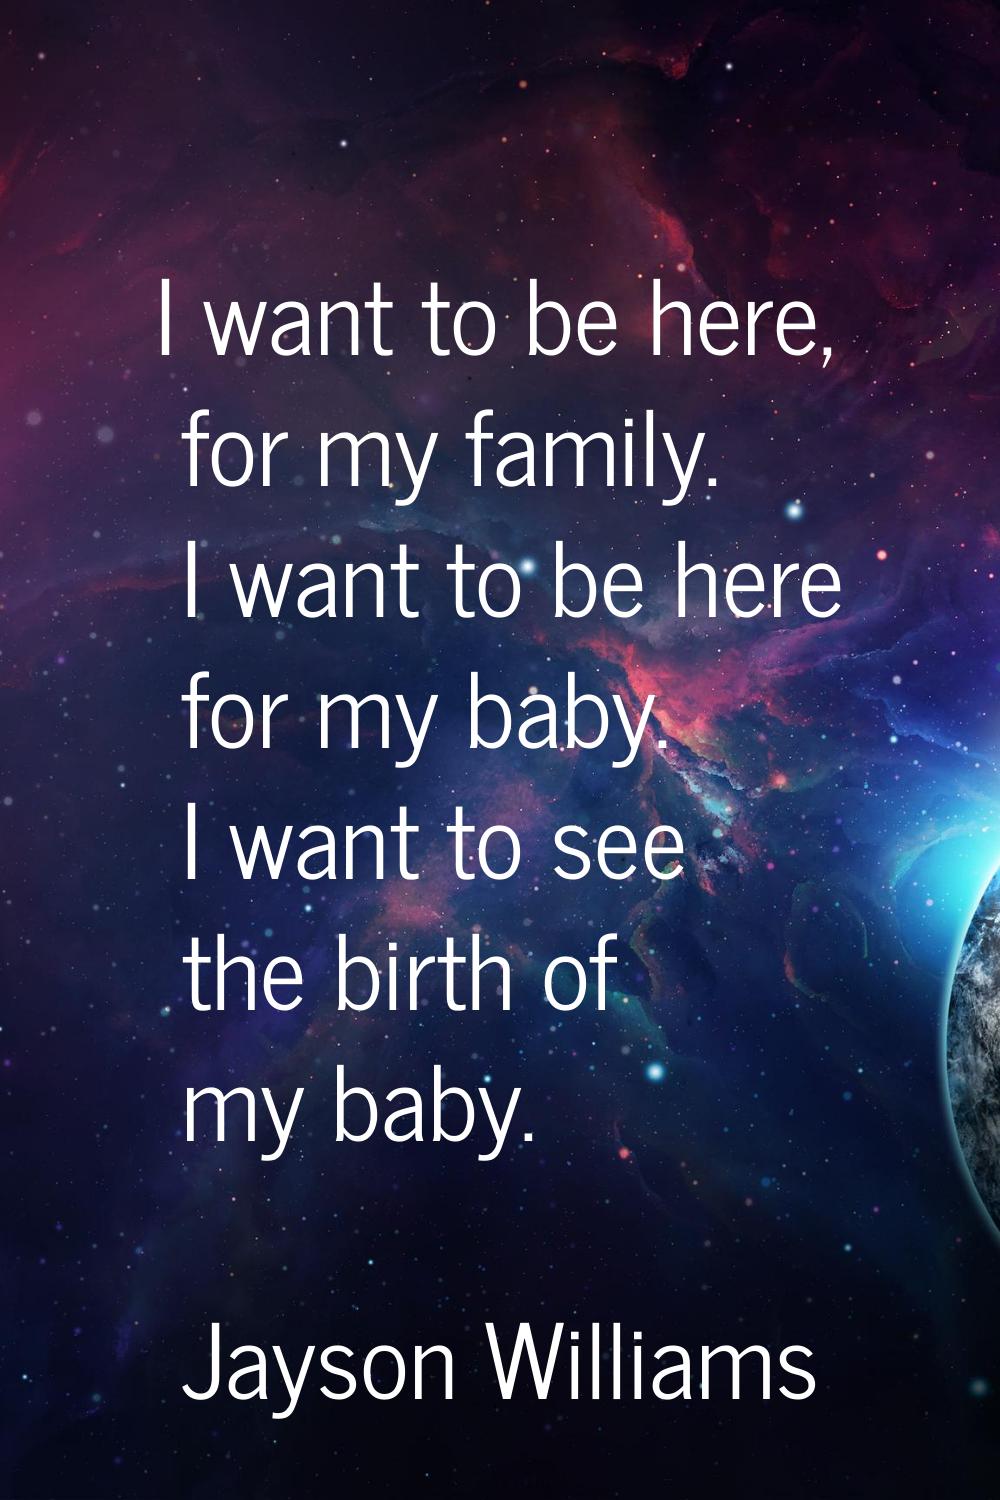 I want to be here, for my family. I want to be here for my baby. I want to see the birth of my baby